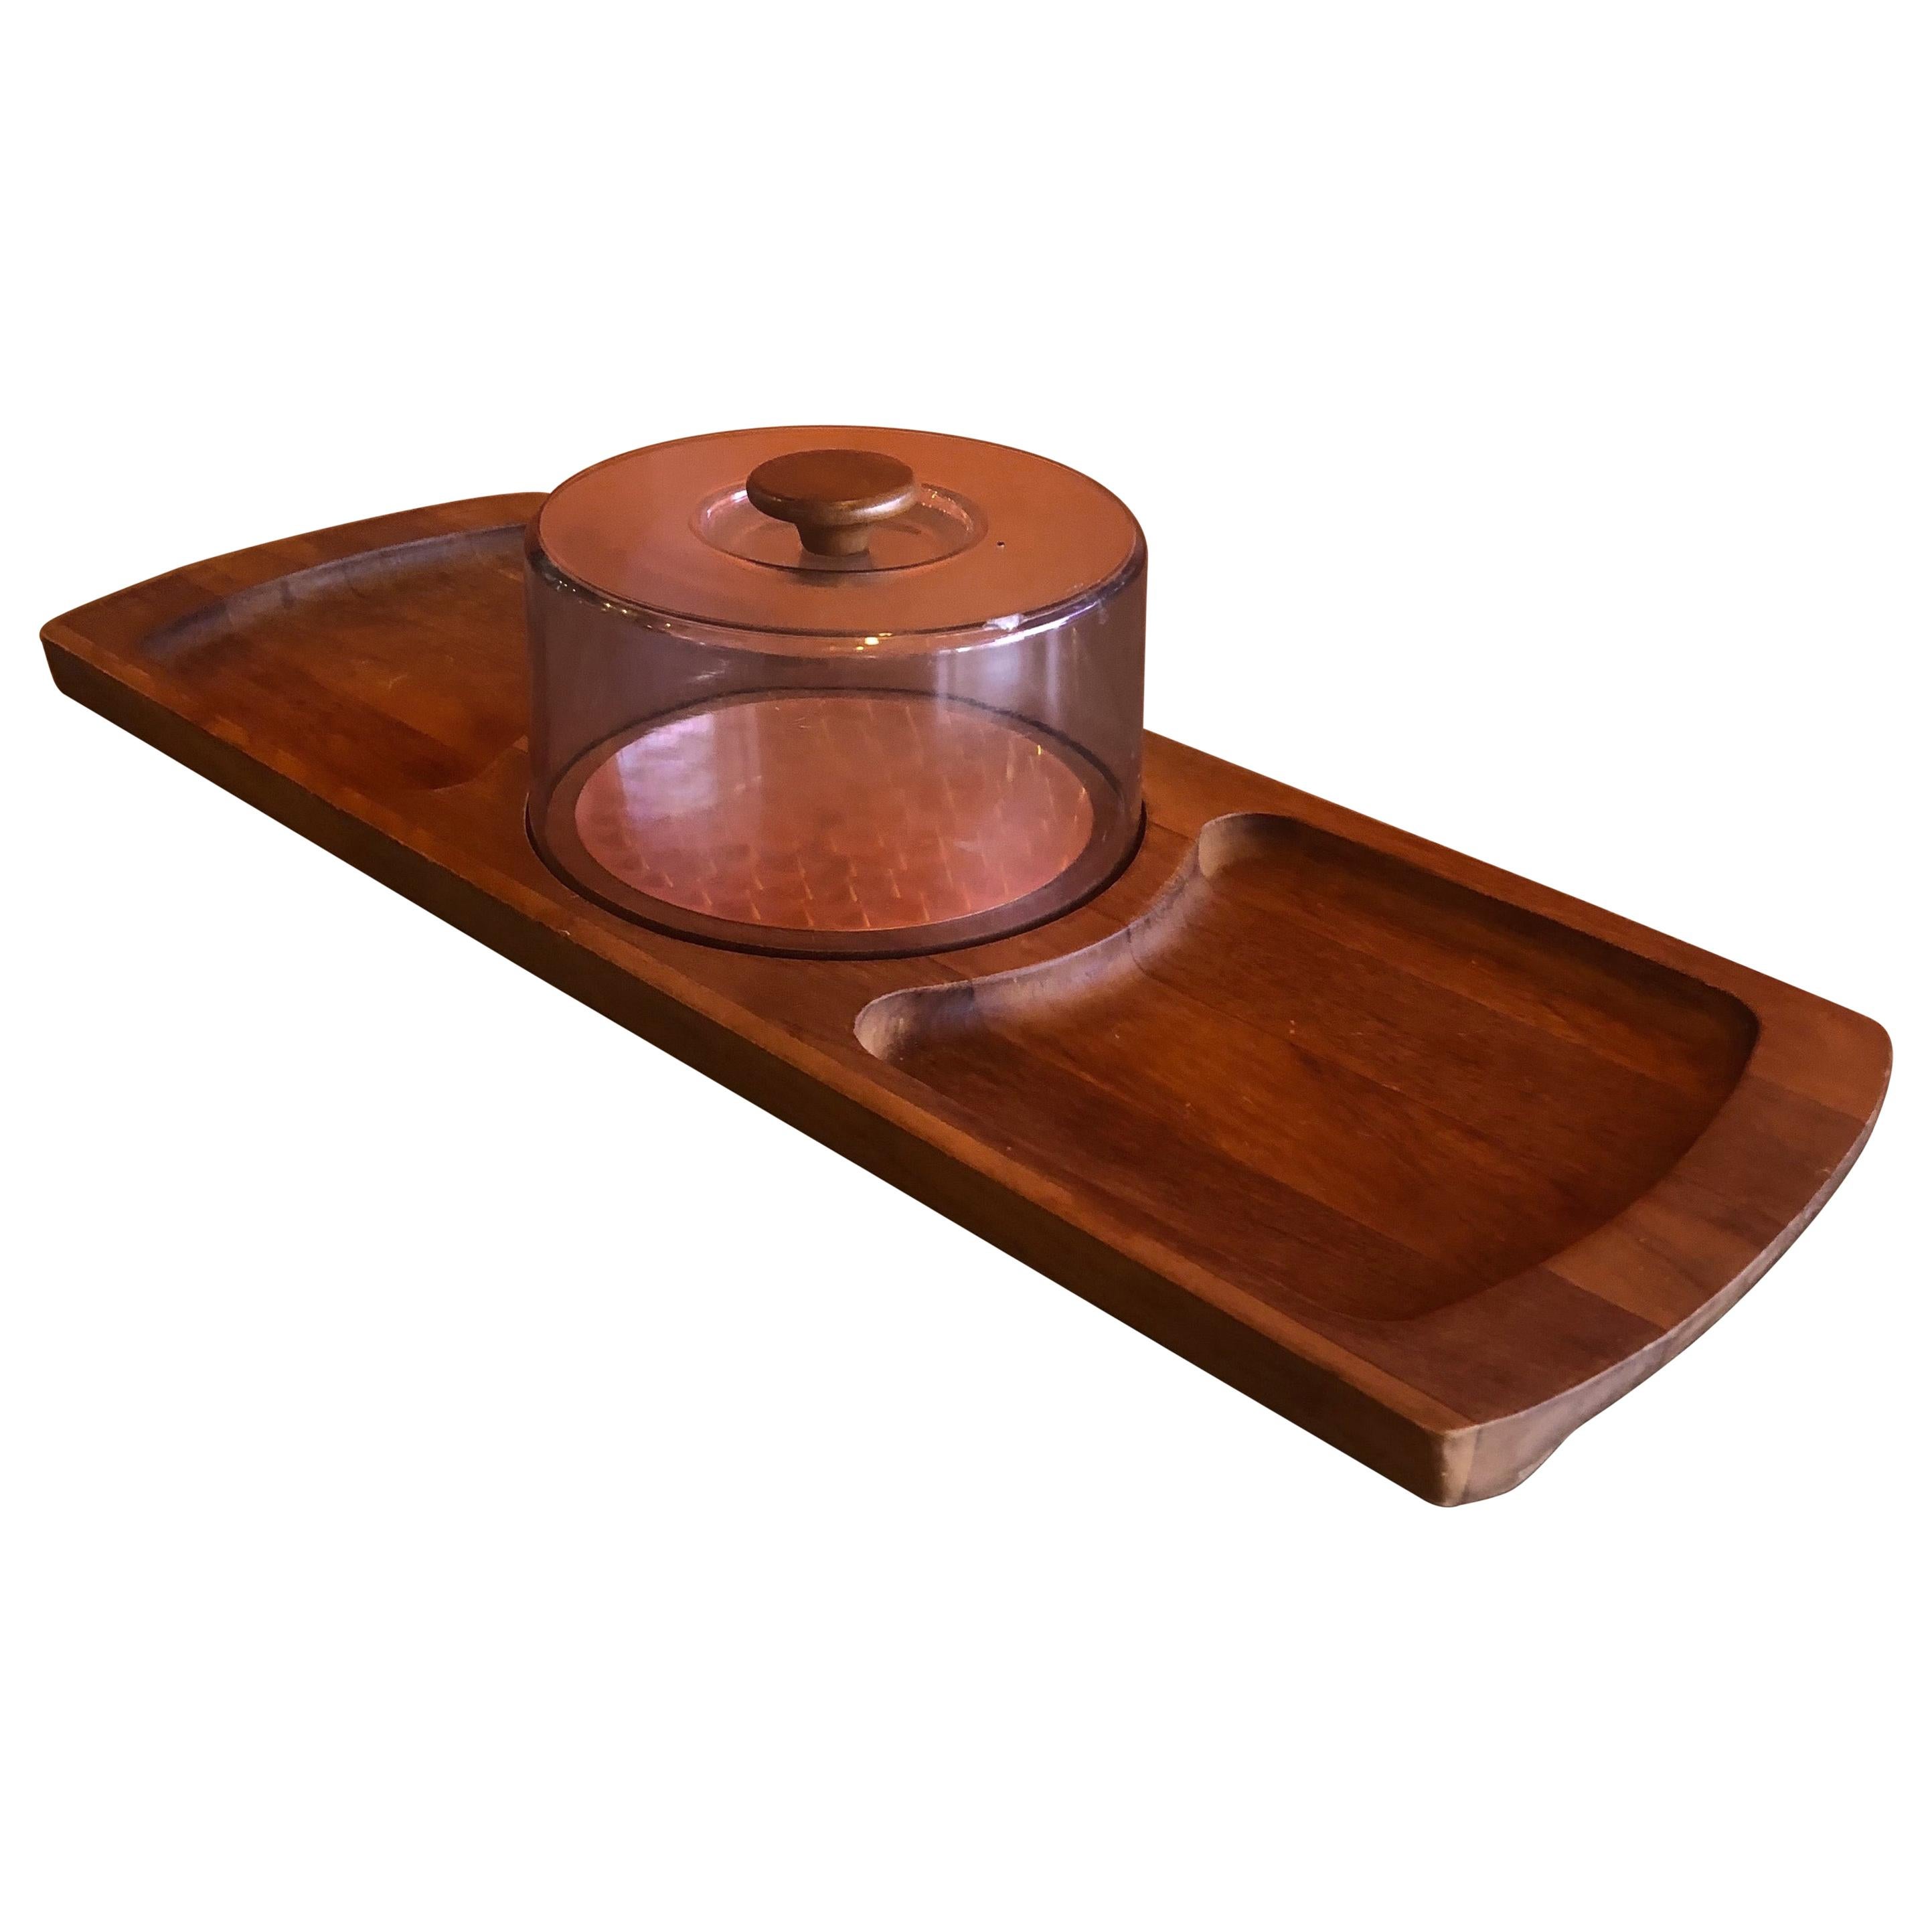 Midcentury Teak Tray / Cheese Board with Dome by Luthje Wood of Denmark